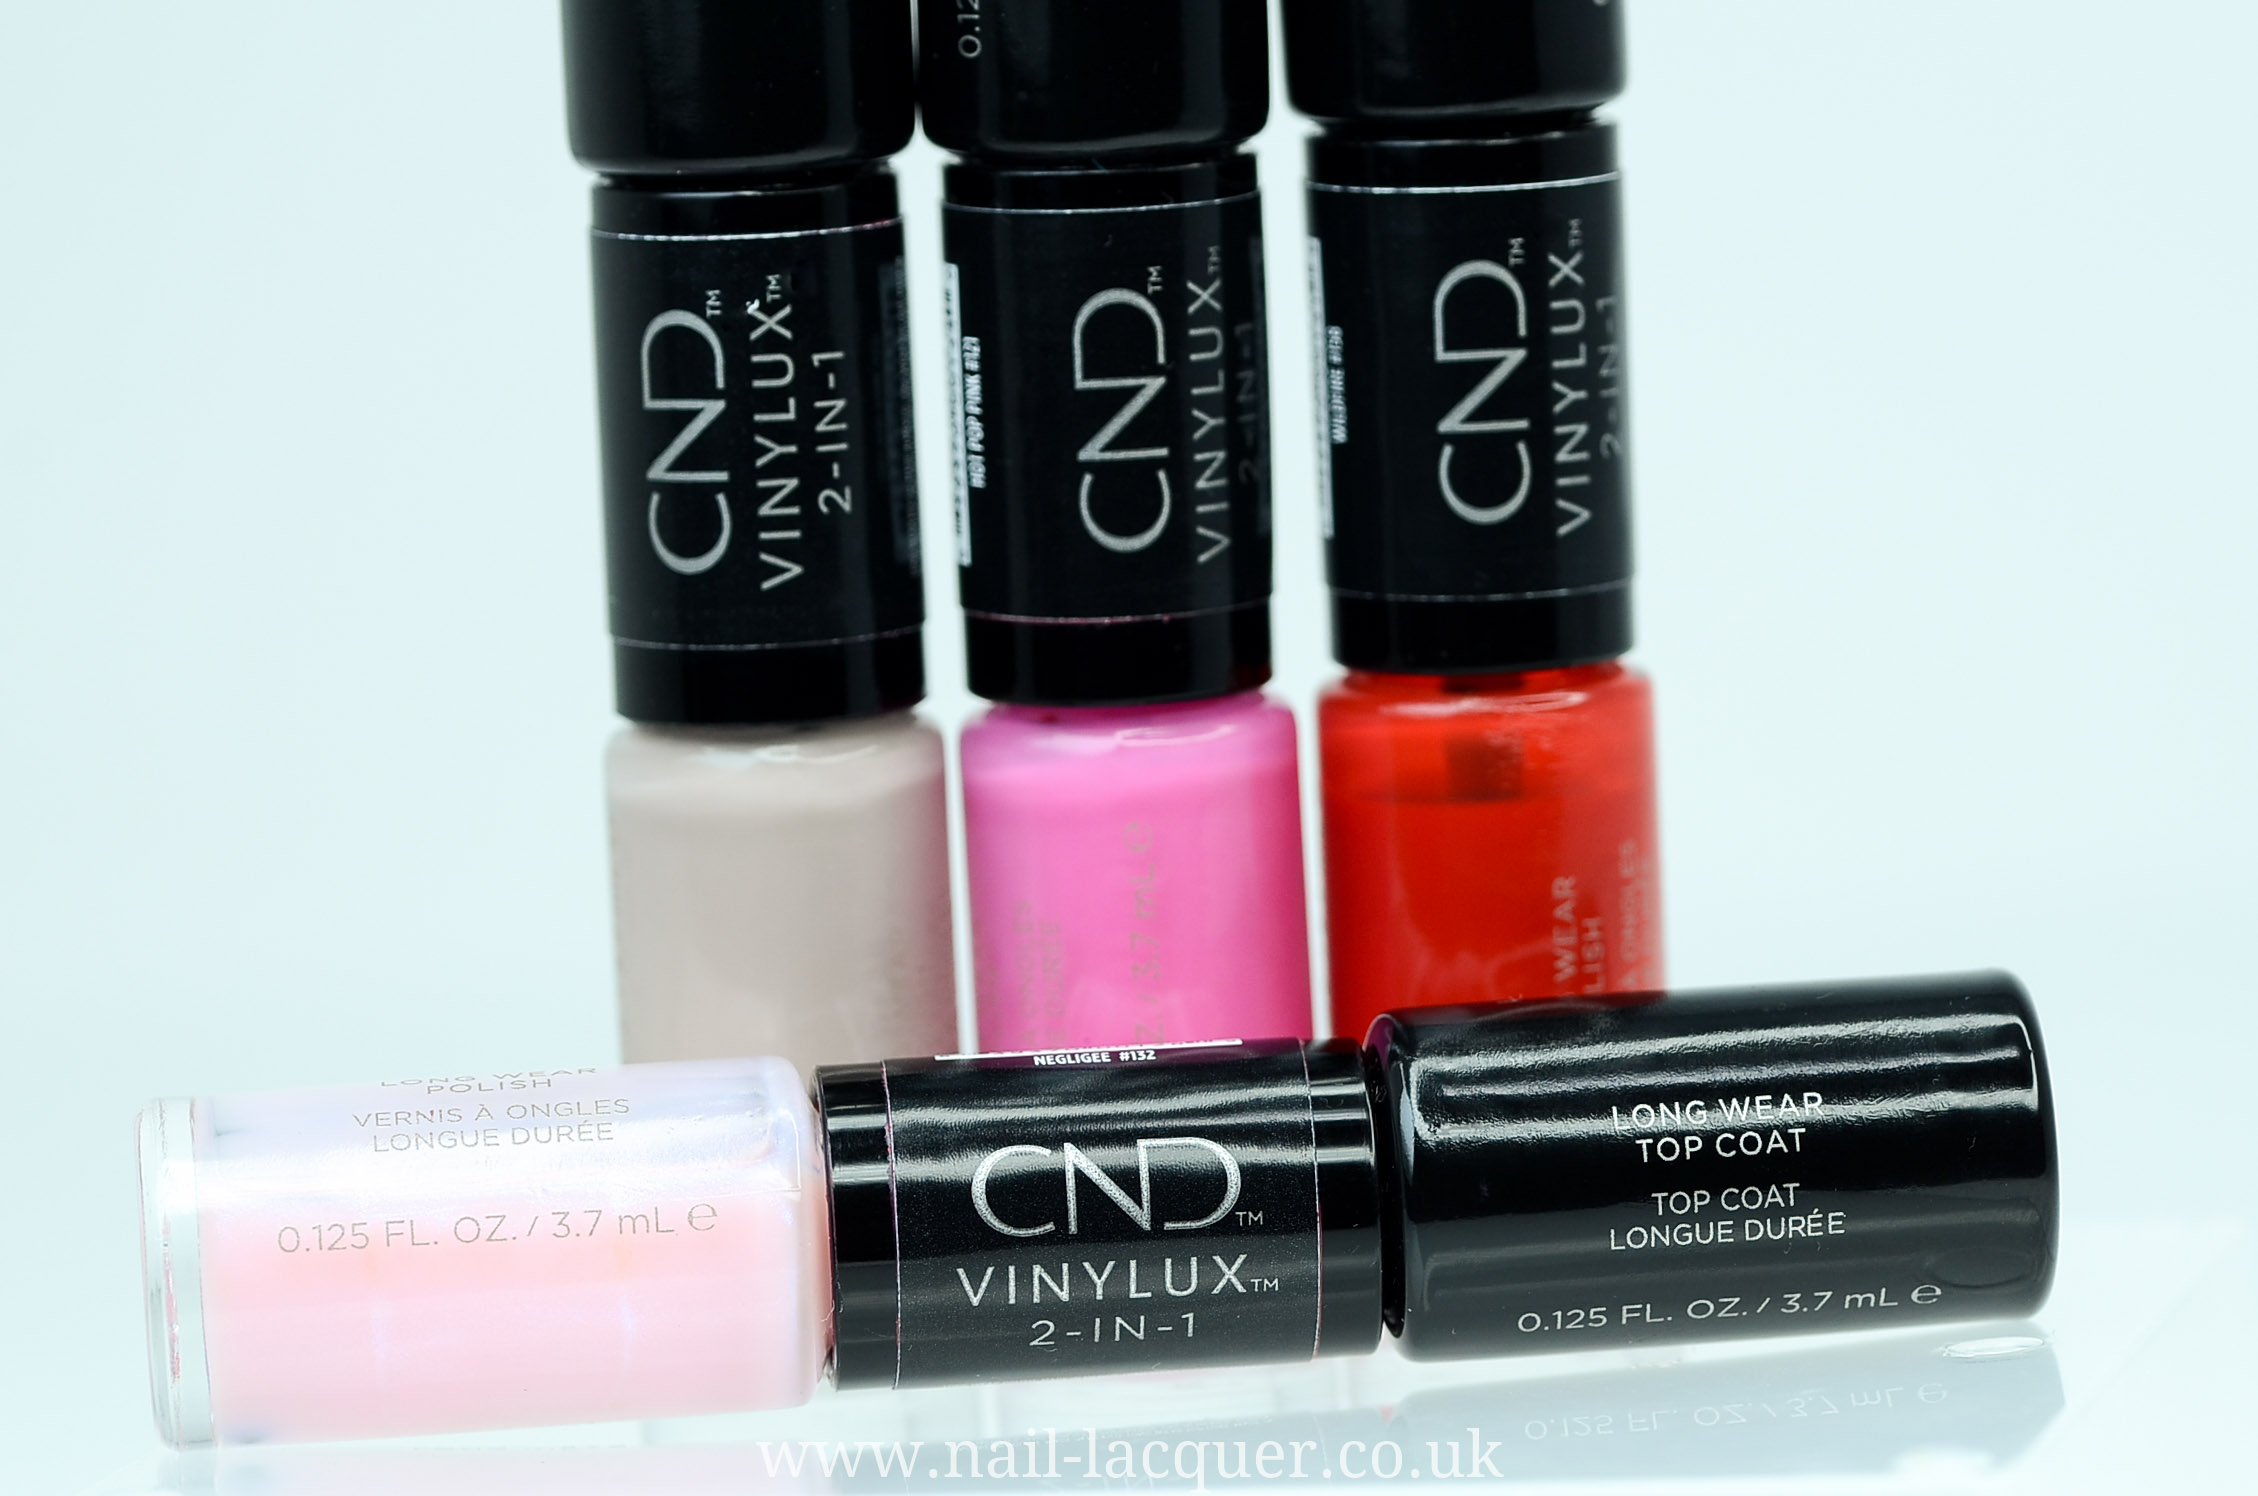 1. CND Vinylux Long Wear Nail Polish in "New Wave" - wide 6